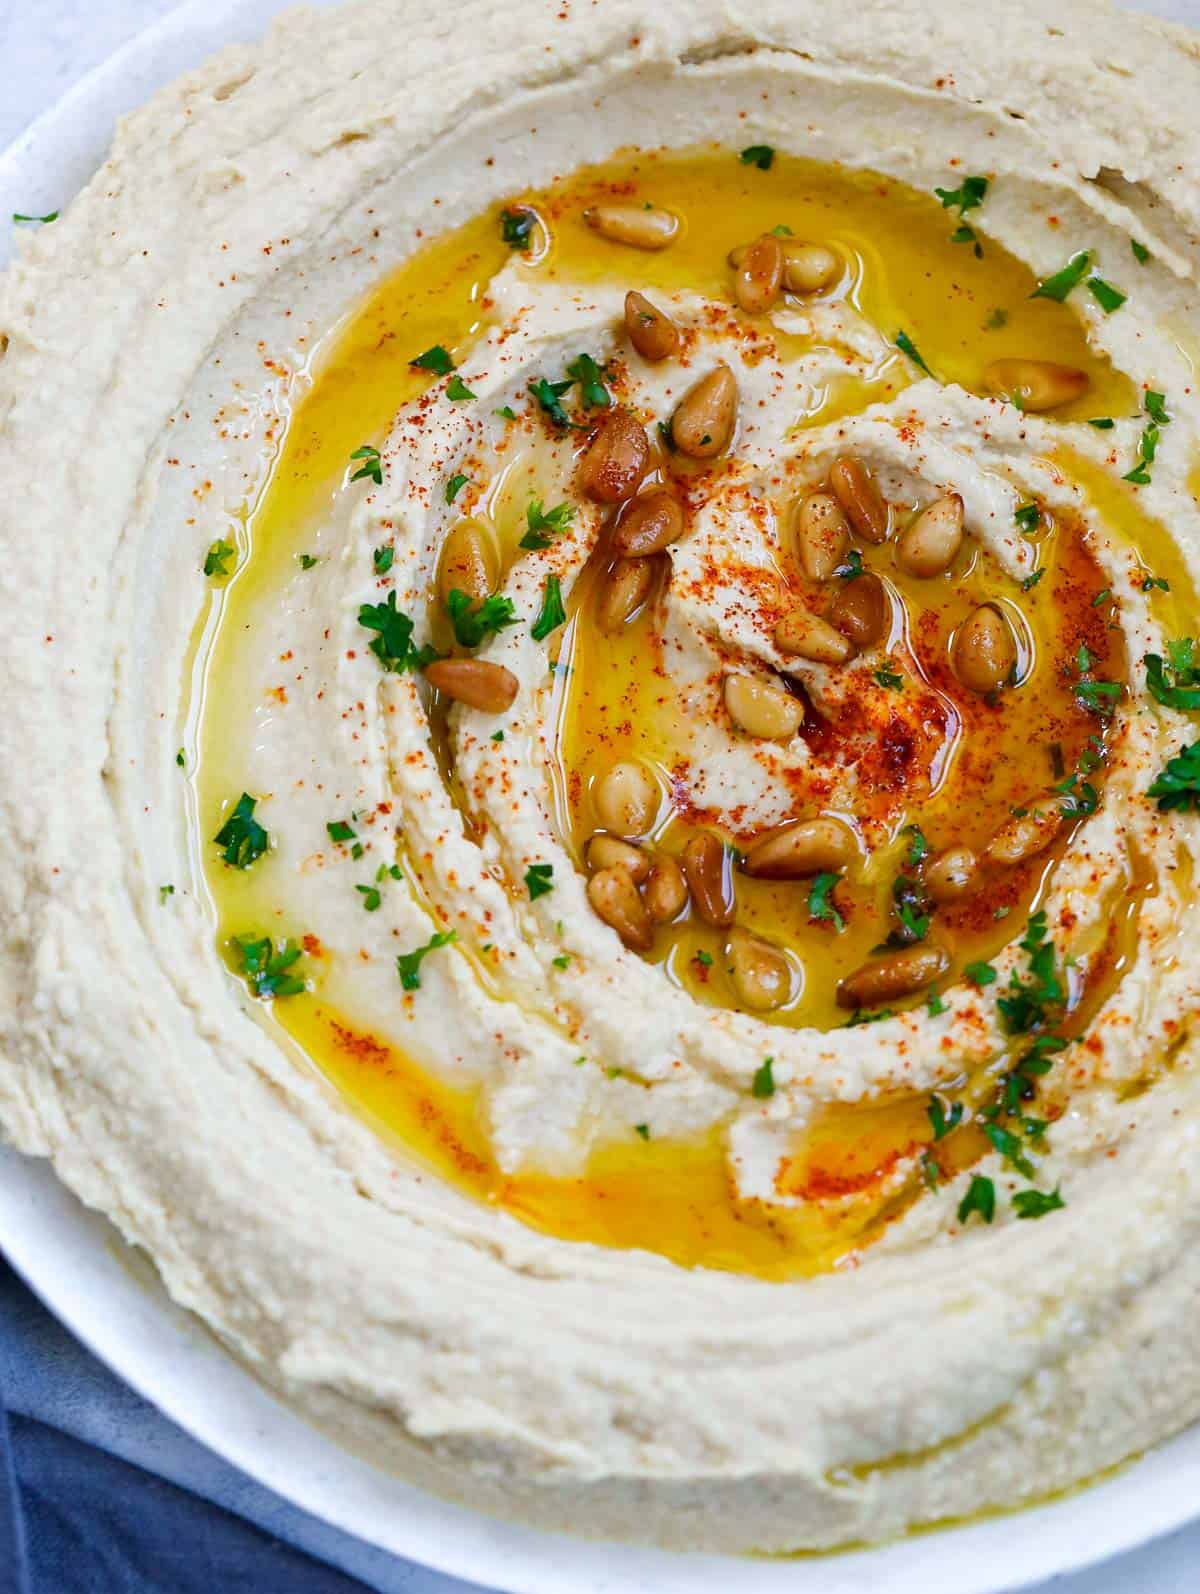 lebanese hummus in a plate, topped with olive oil, paprika, pine nuts 